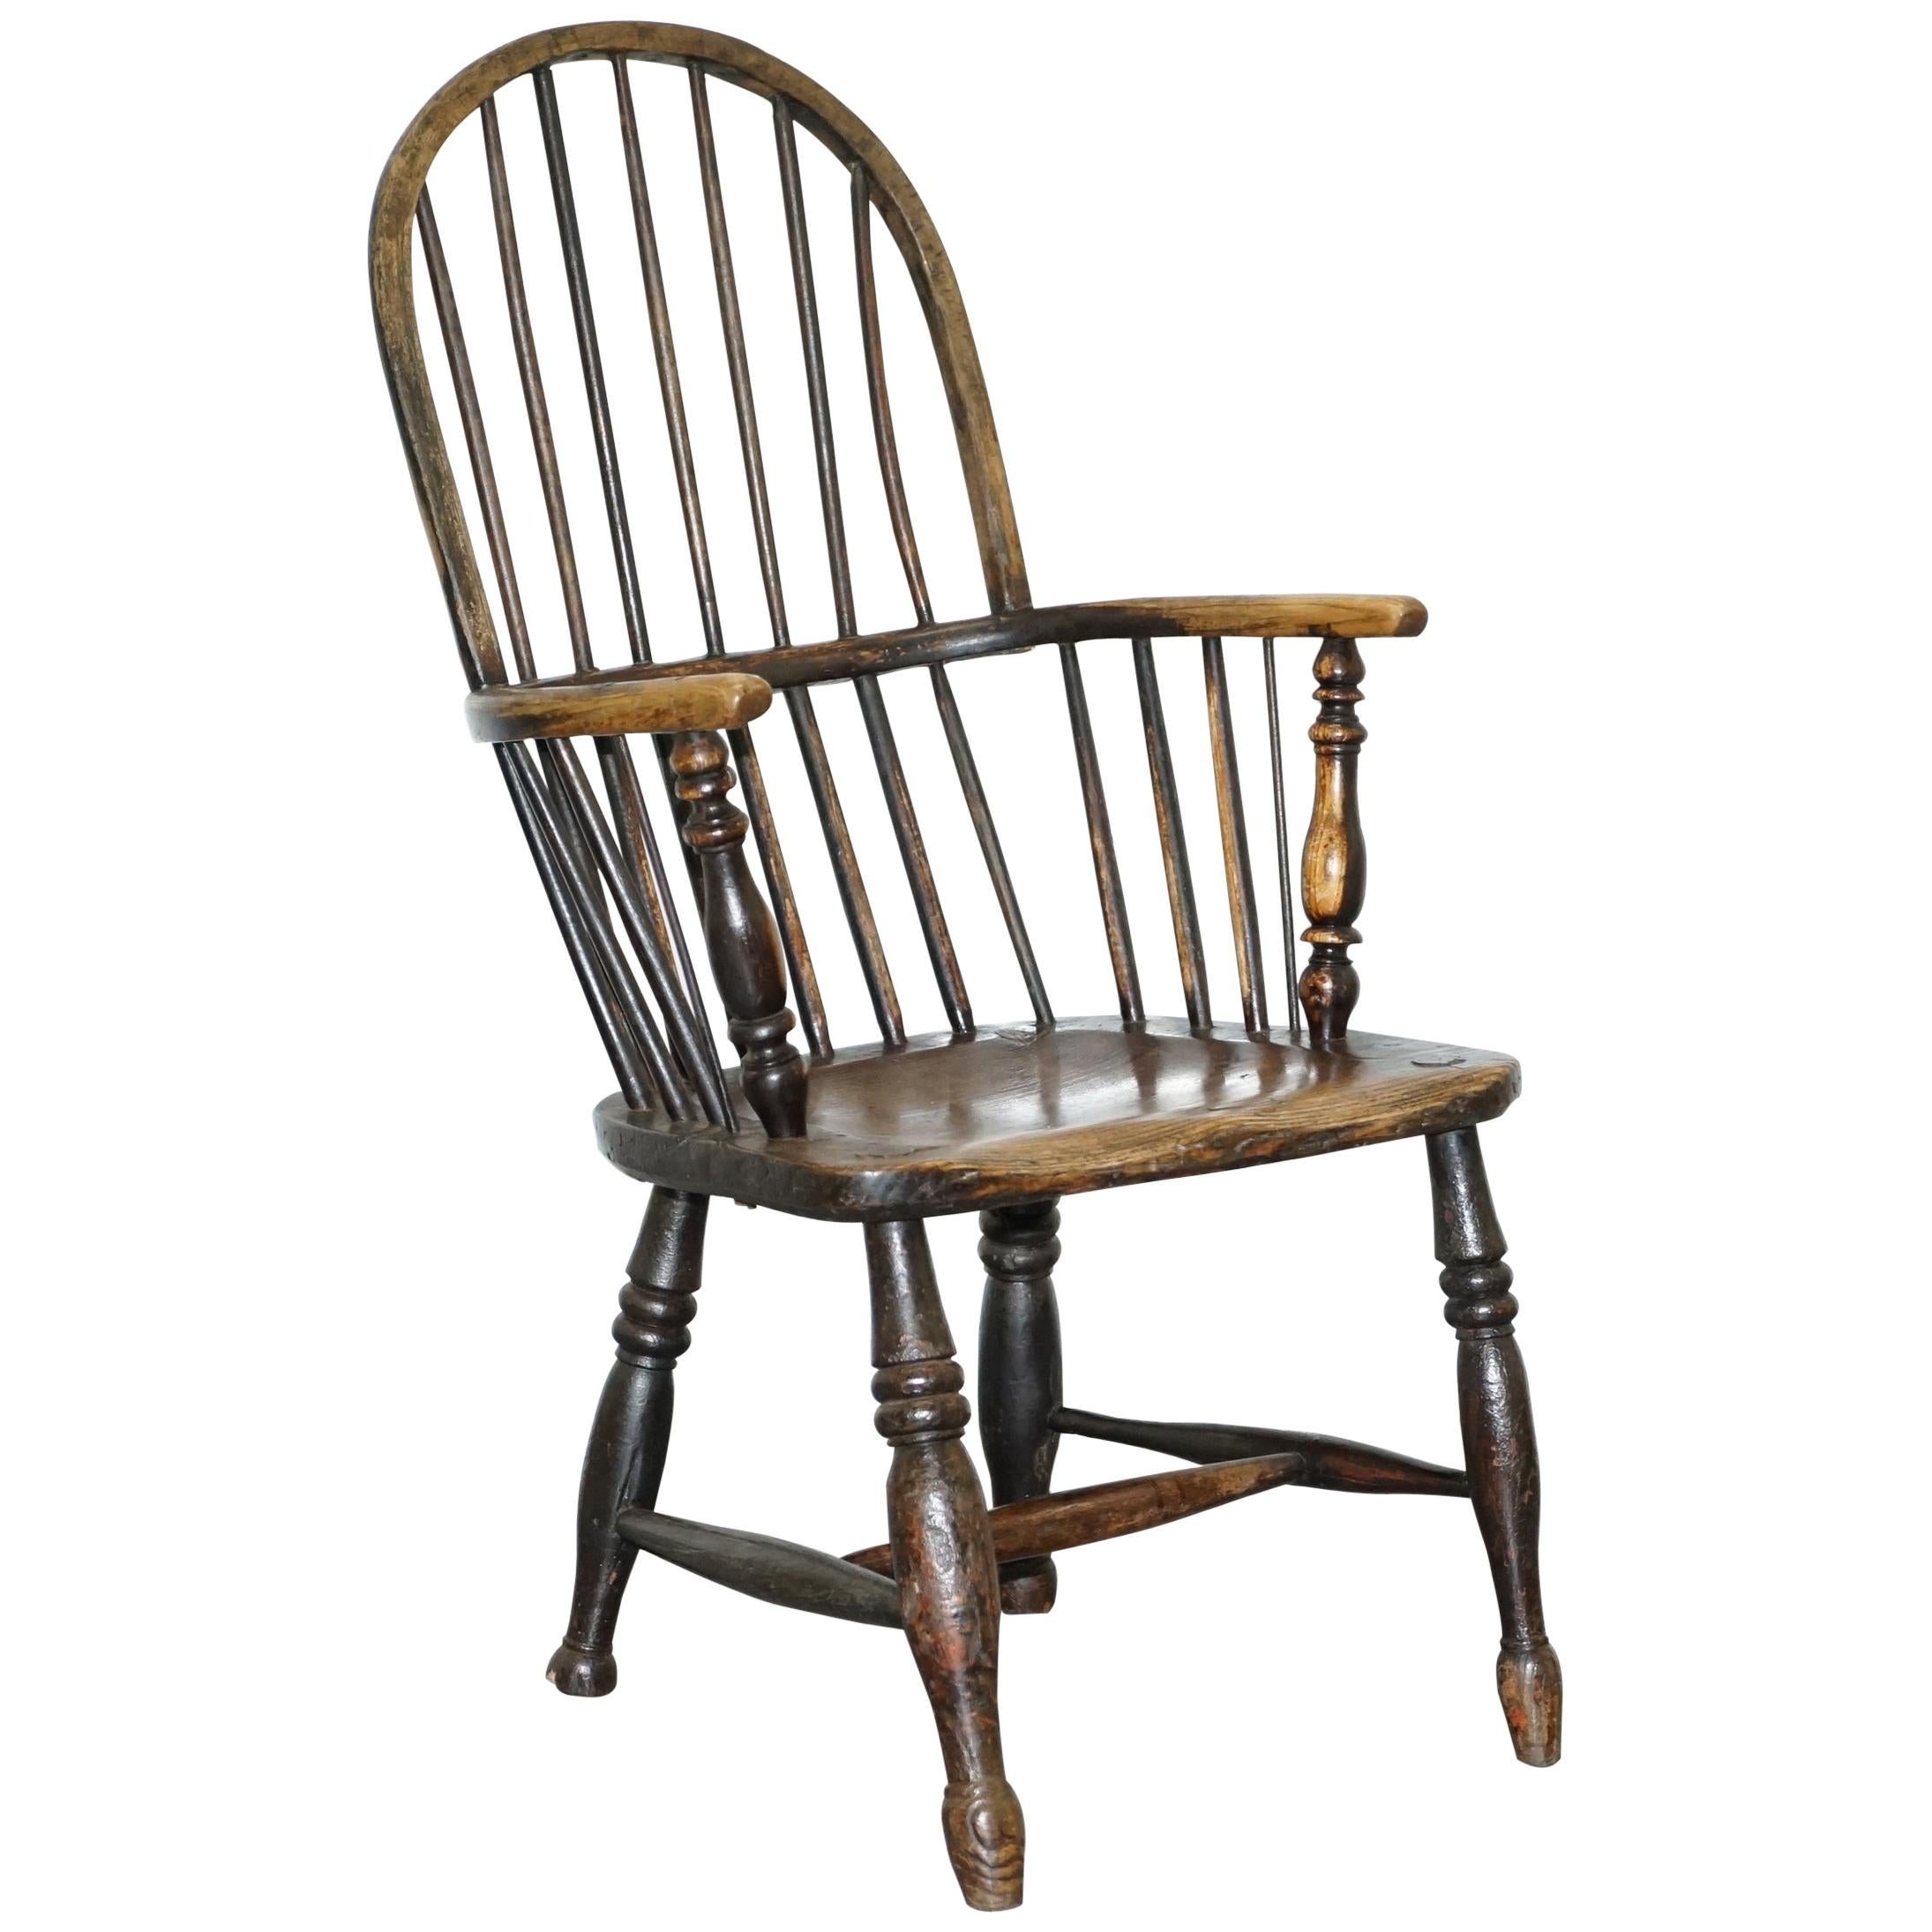 Early Original Worn Paint 19th Century Hoop Back West Country Windsor Armchair